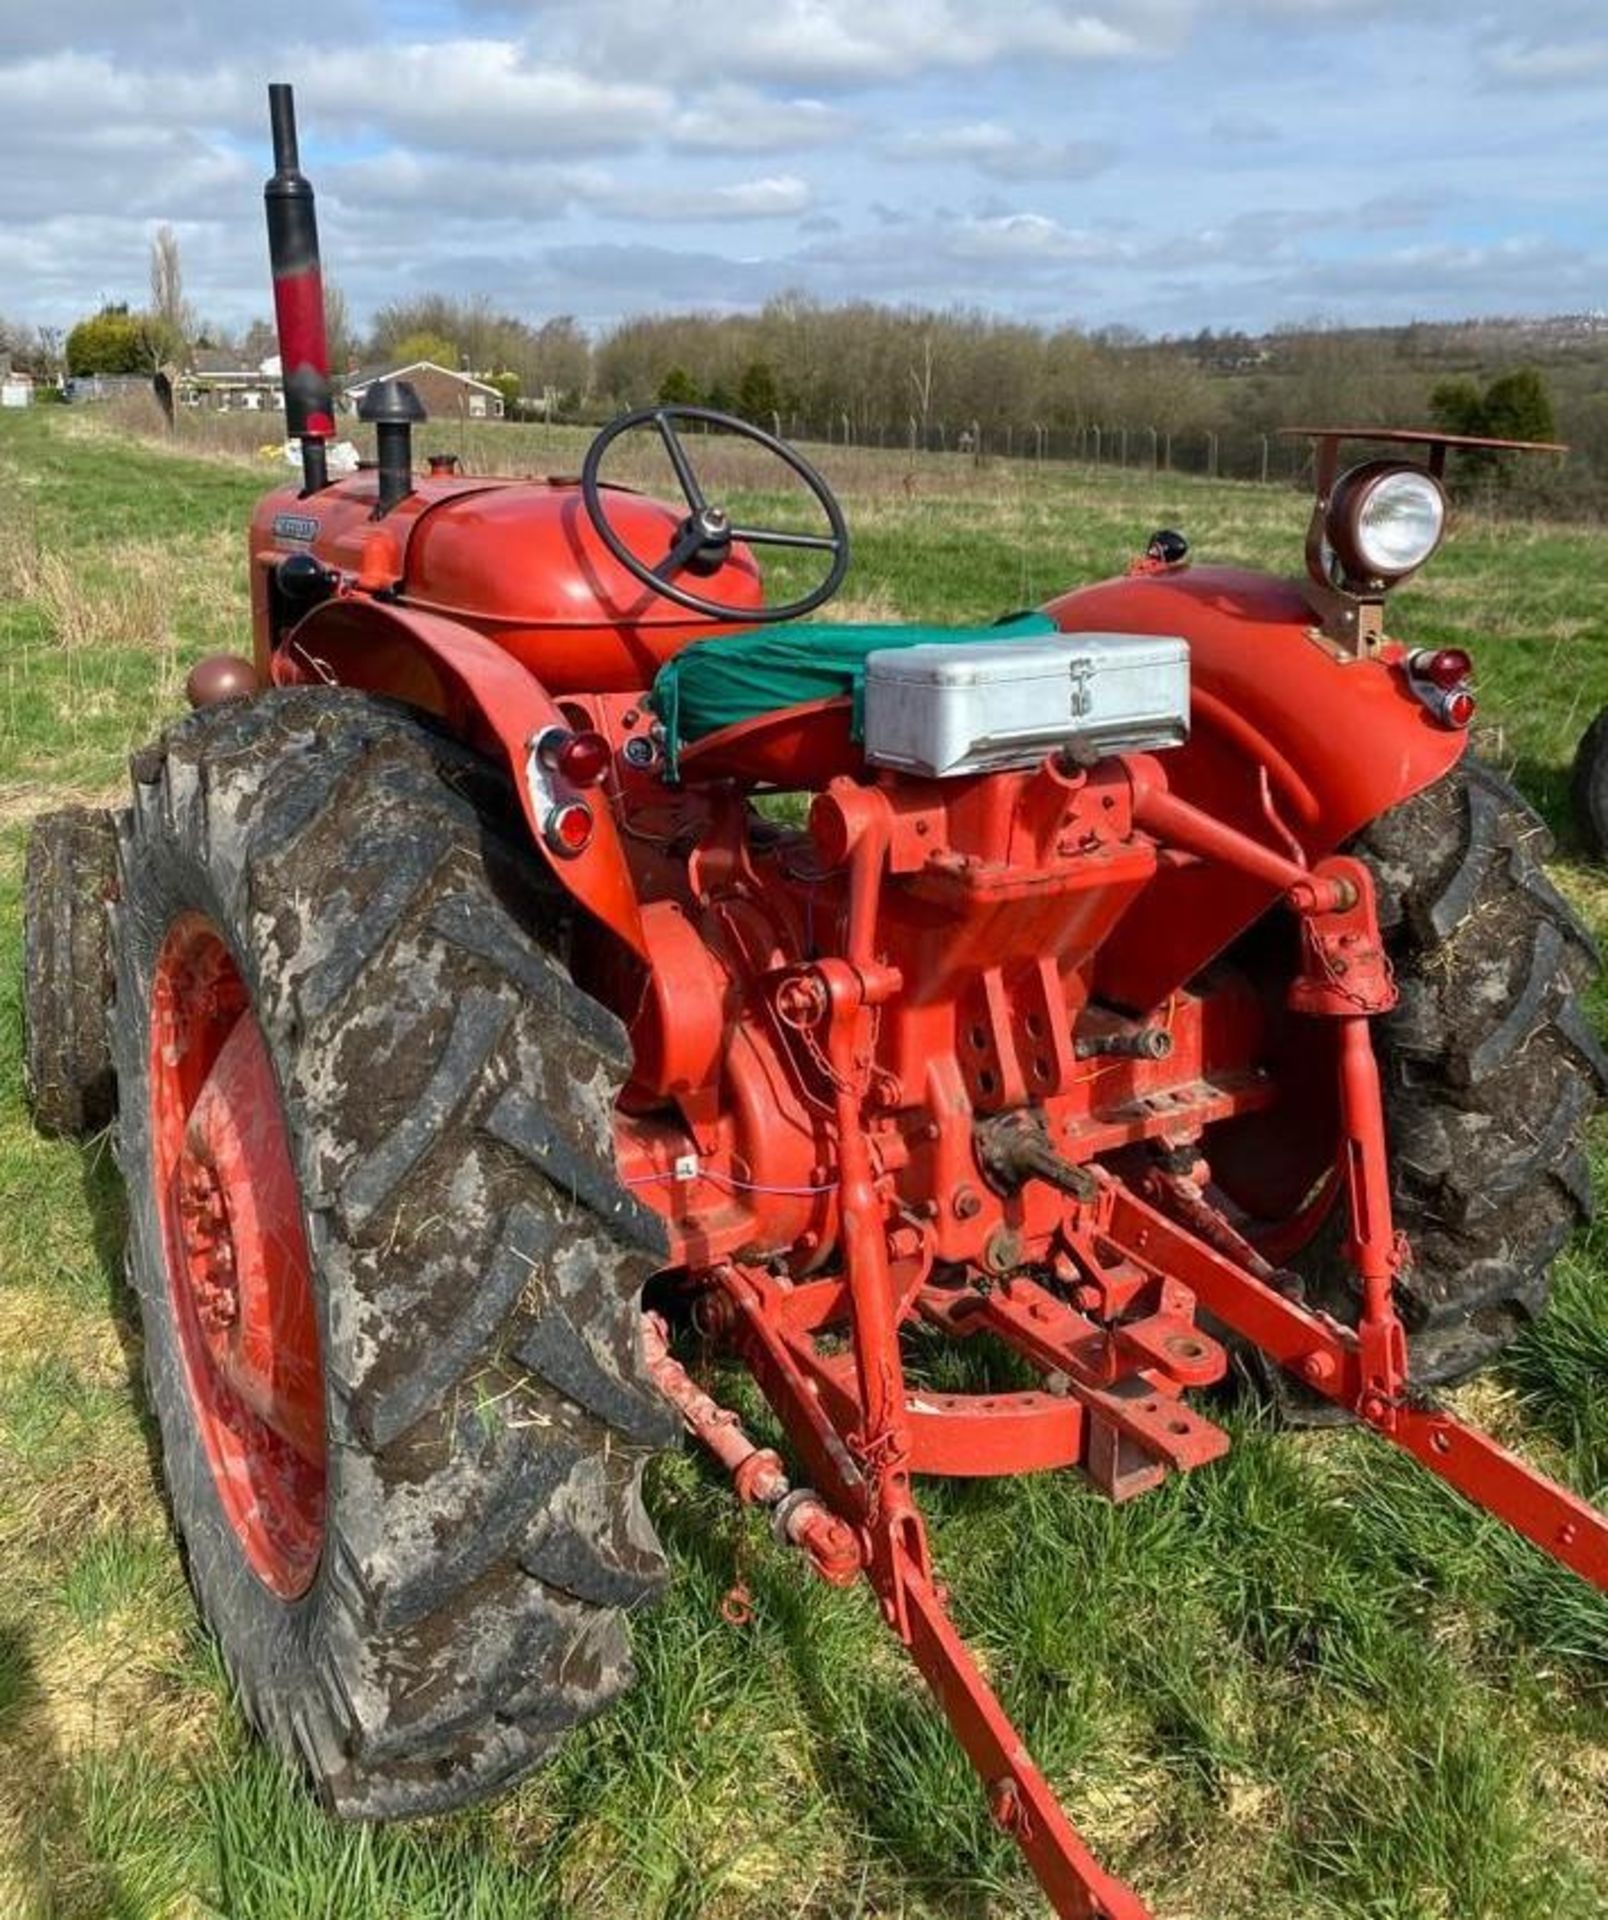 A NUFFIELD UNIVERSAL THREE TRACTOR GOOD ORDER RECENT REBUILD 4 NEW TYRES RE - CON STARTER CLUTCH & - Image 9 of 9